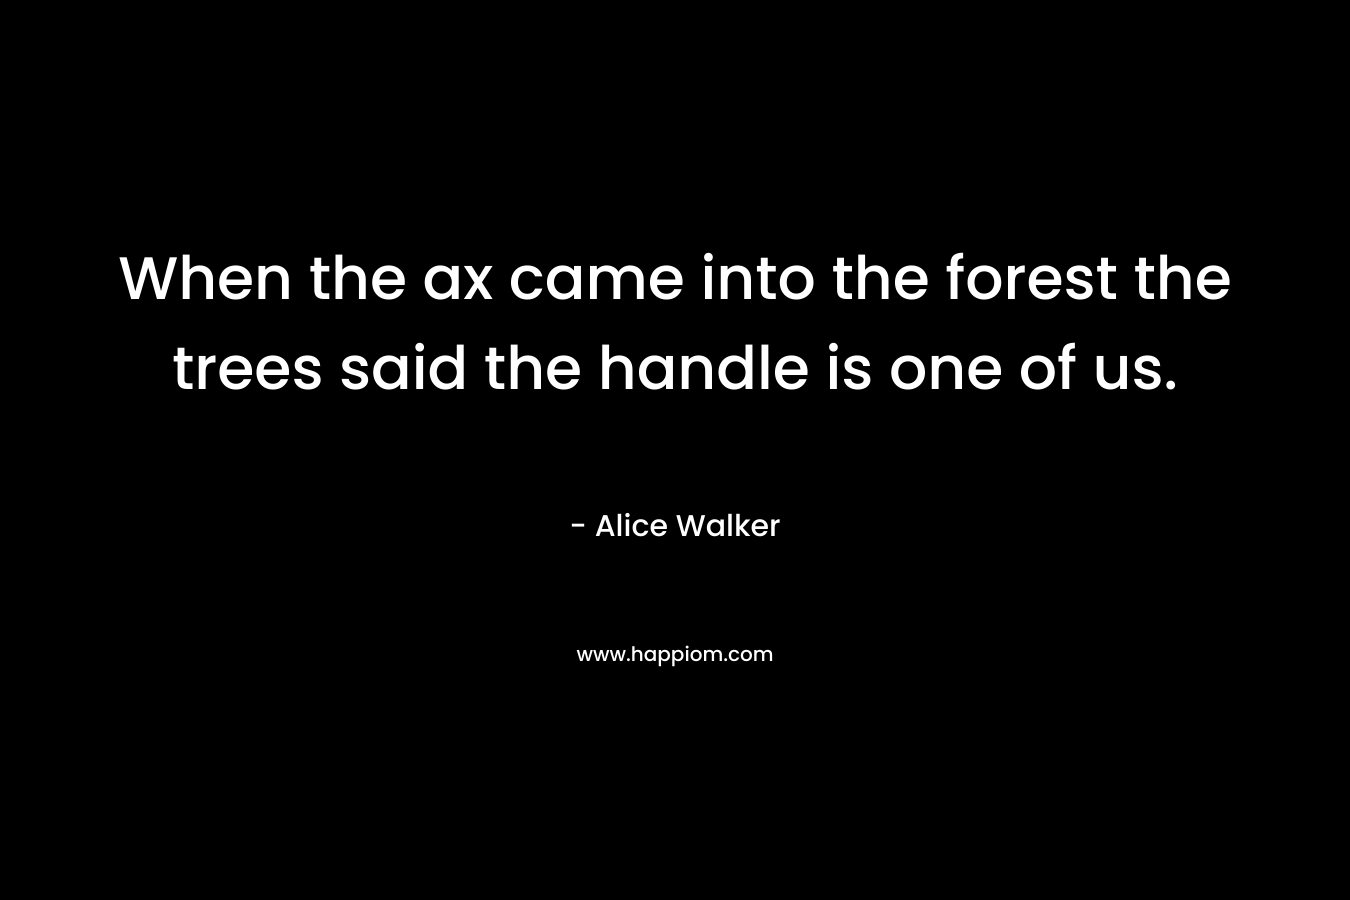 When the ax came into the forest the trees said the handle is one of us. – Alice Walker